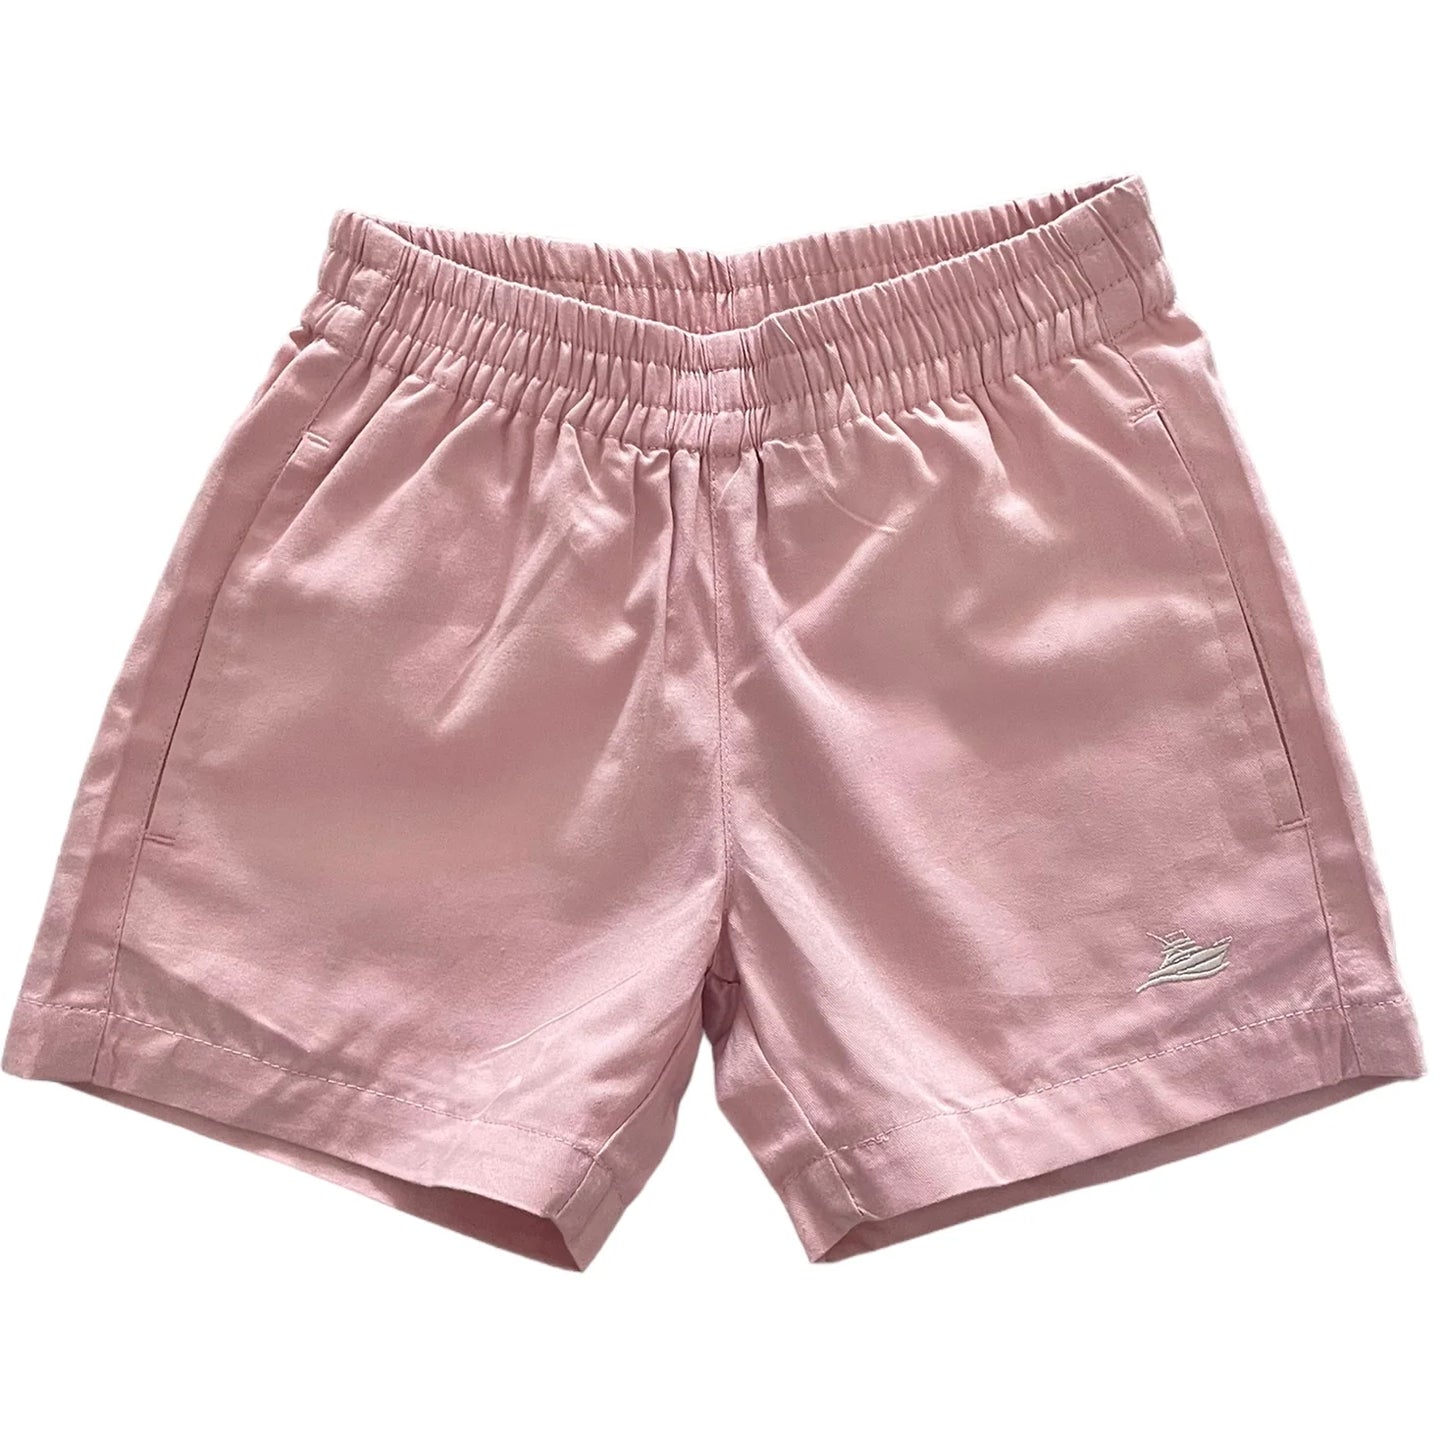 Dress Shorts in Peach  - Doodlebug's Children's Boutique